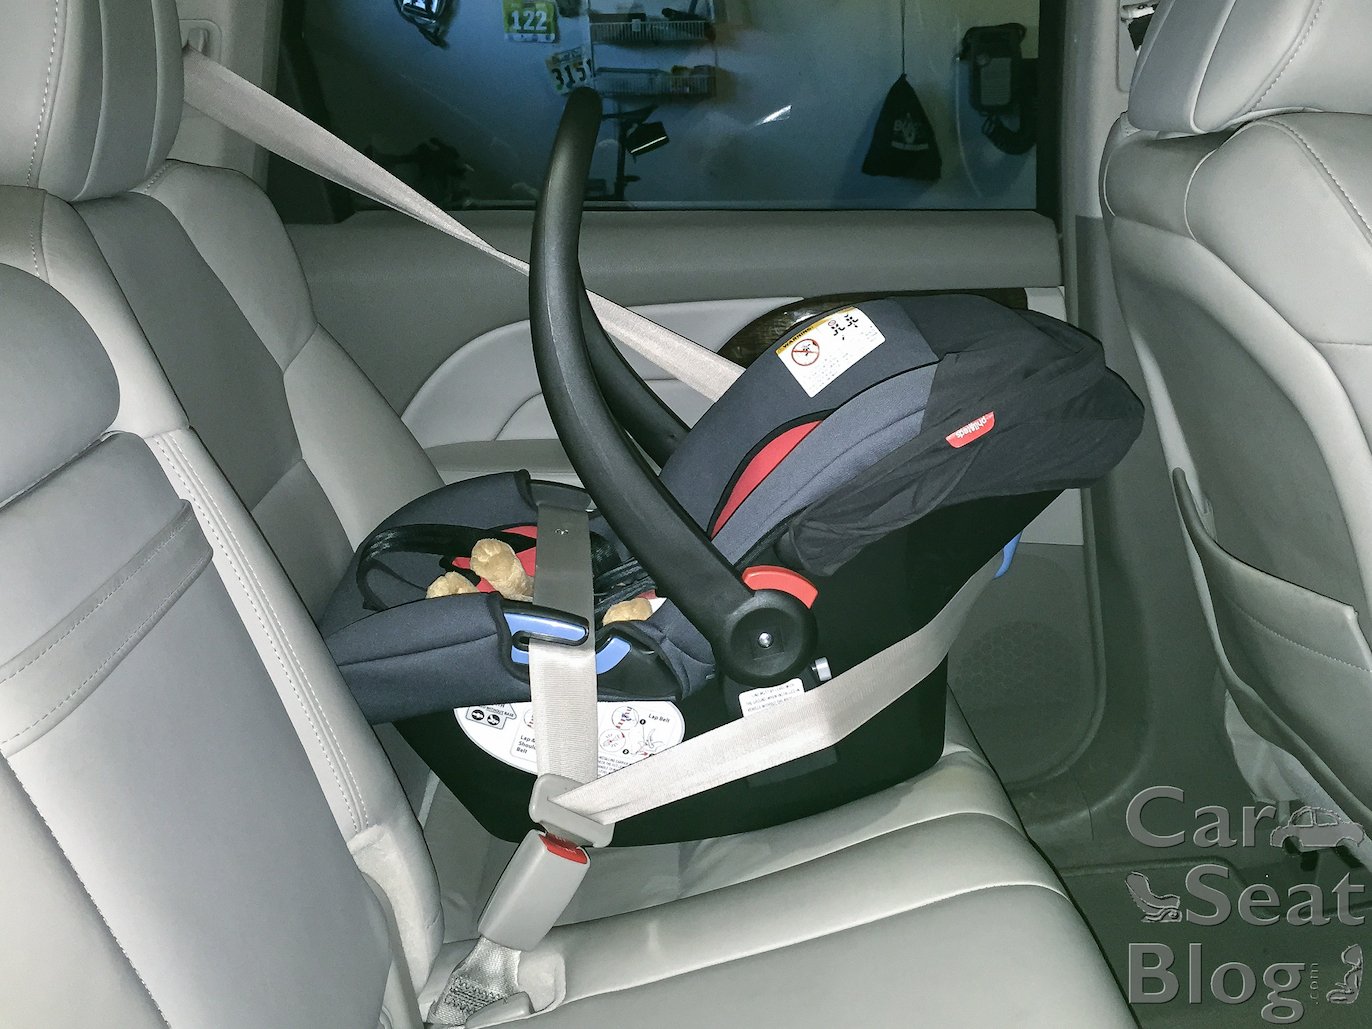 Rear Facing Cats With European, How To Put Car Seat With Seatbelt